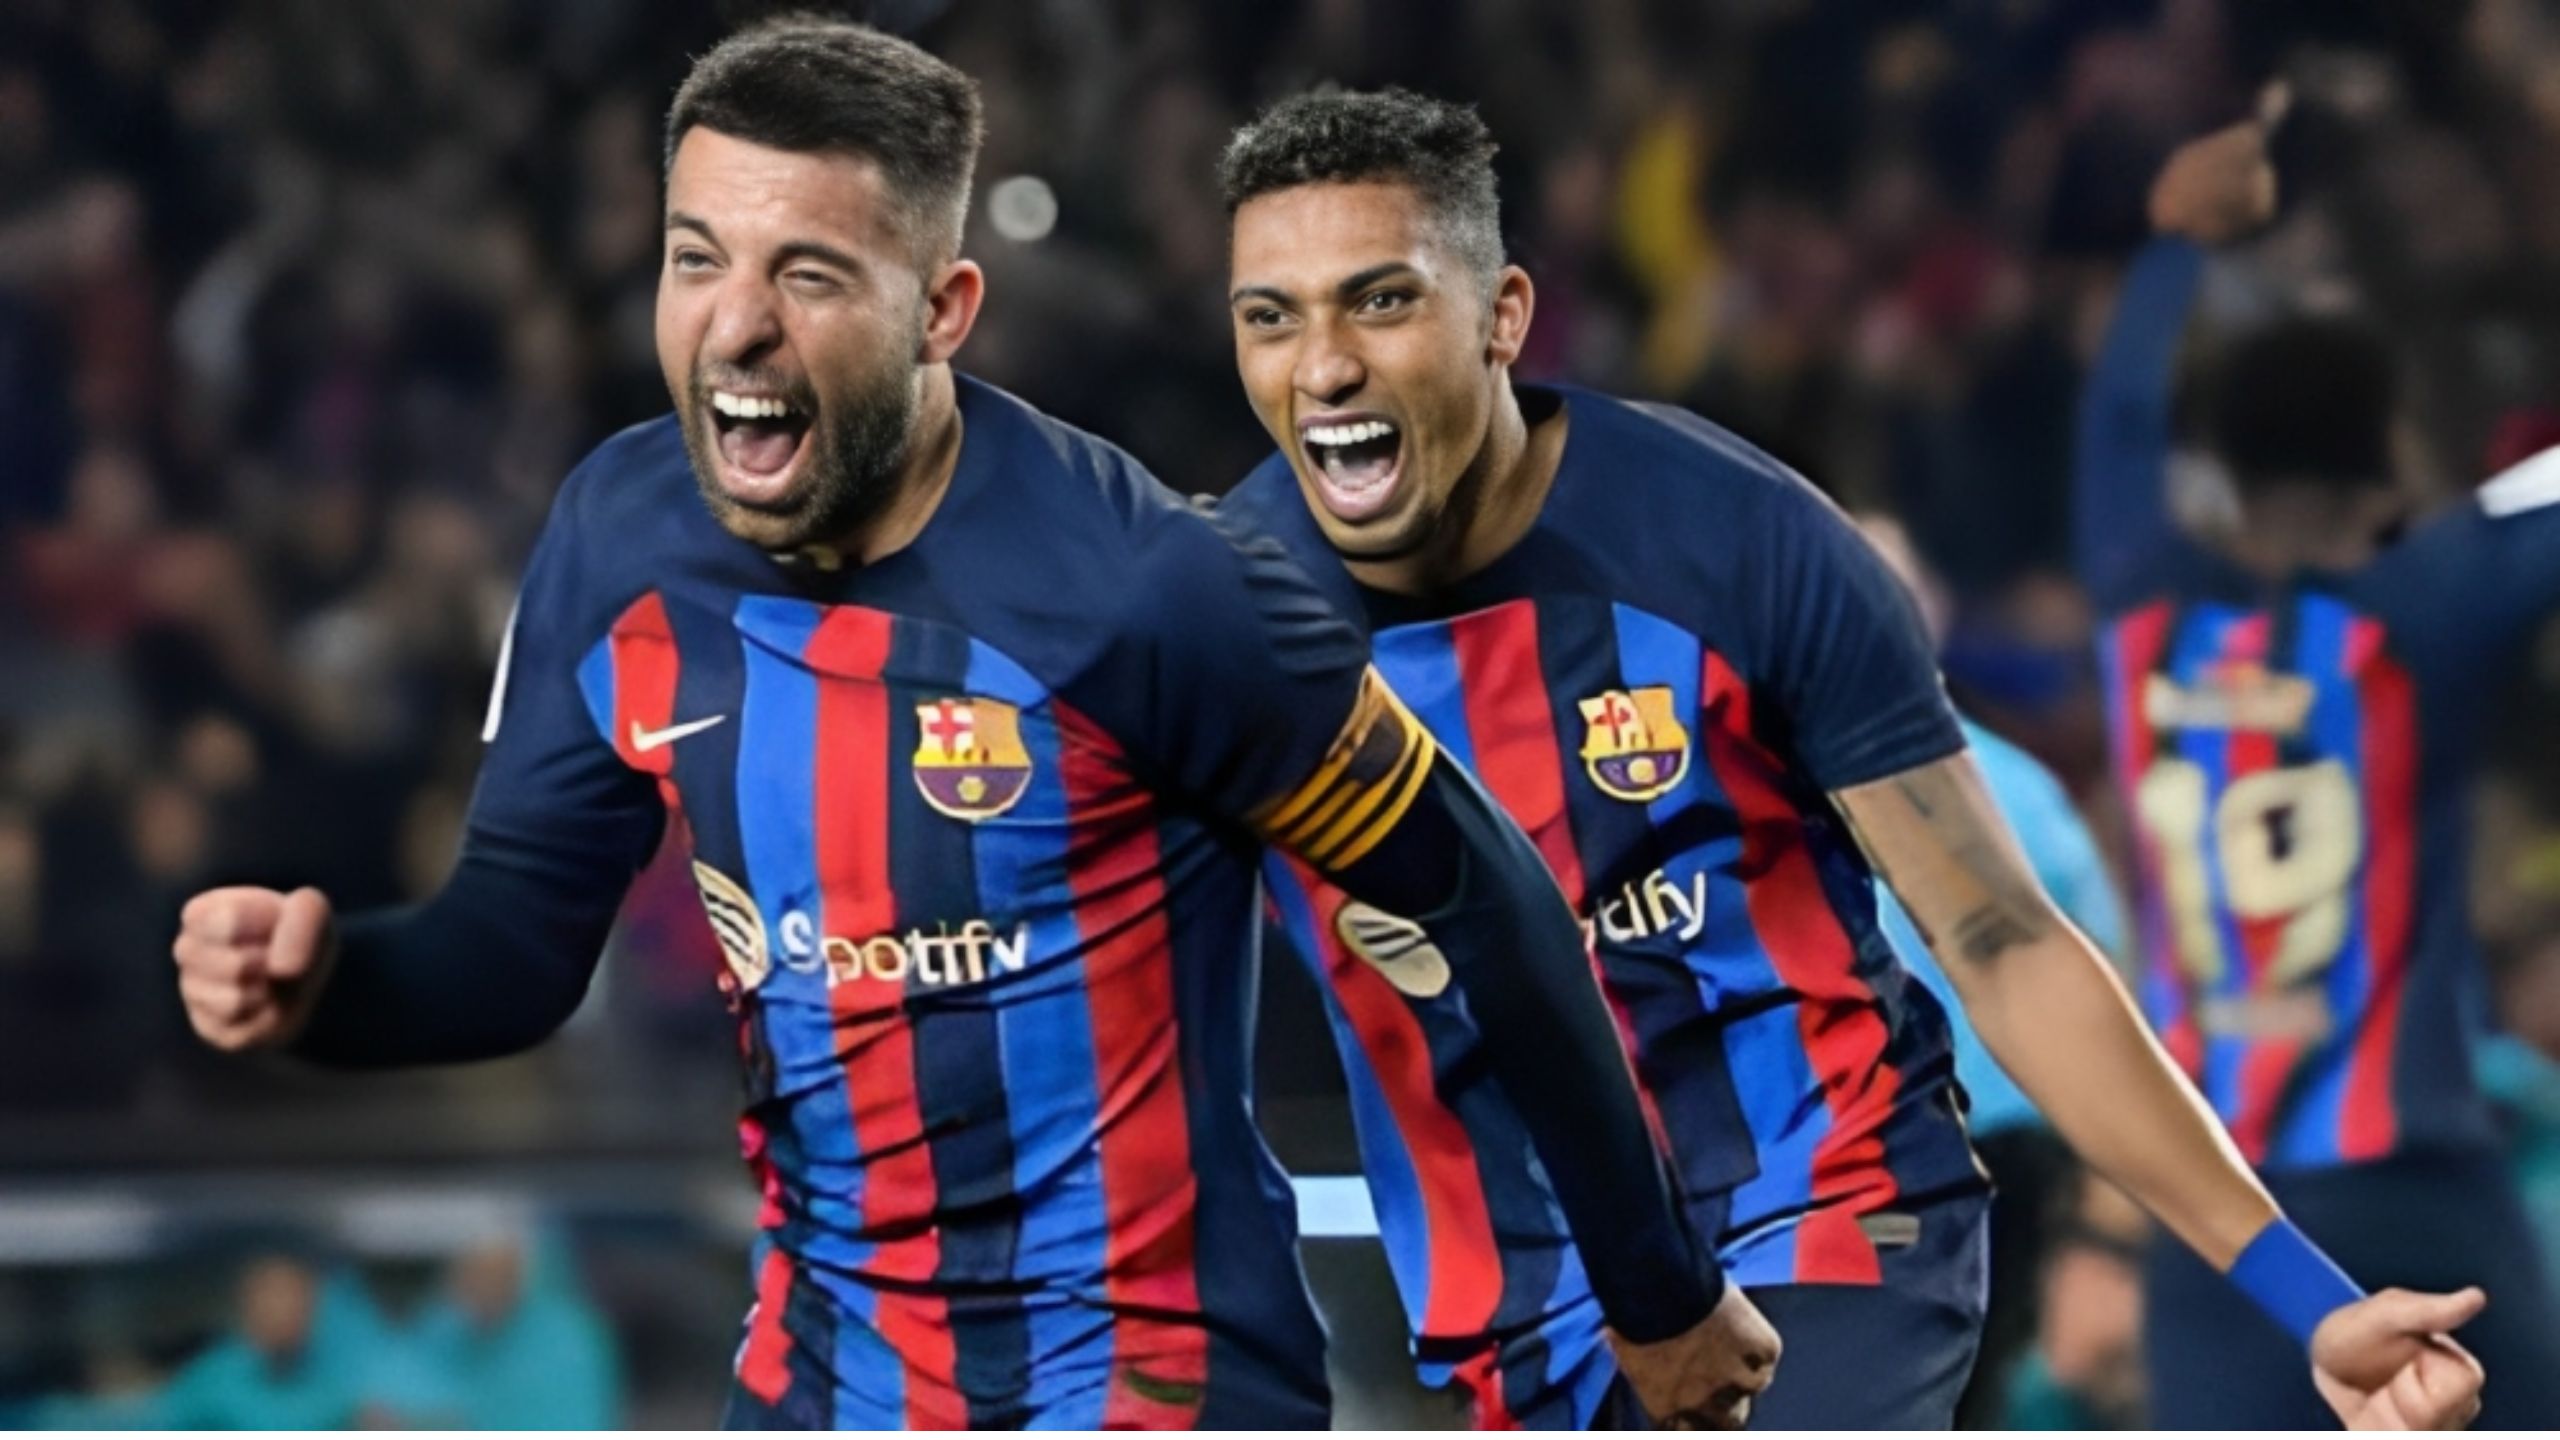 Villarreal vs Barcelona: Live Stream, TV Channel, Kick-off Time, and Where to Watch